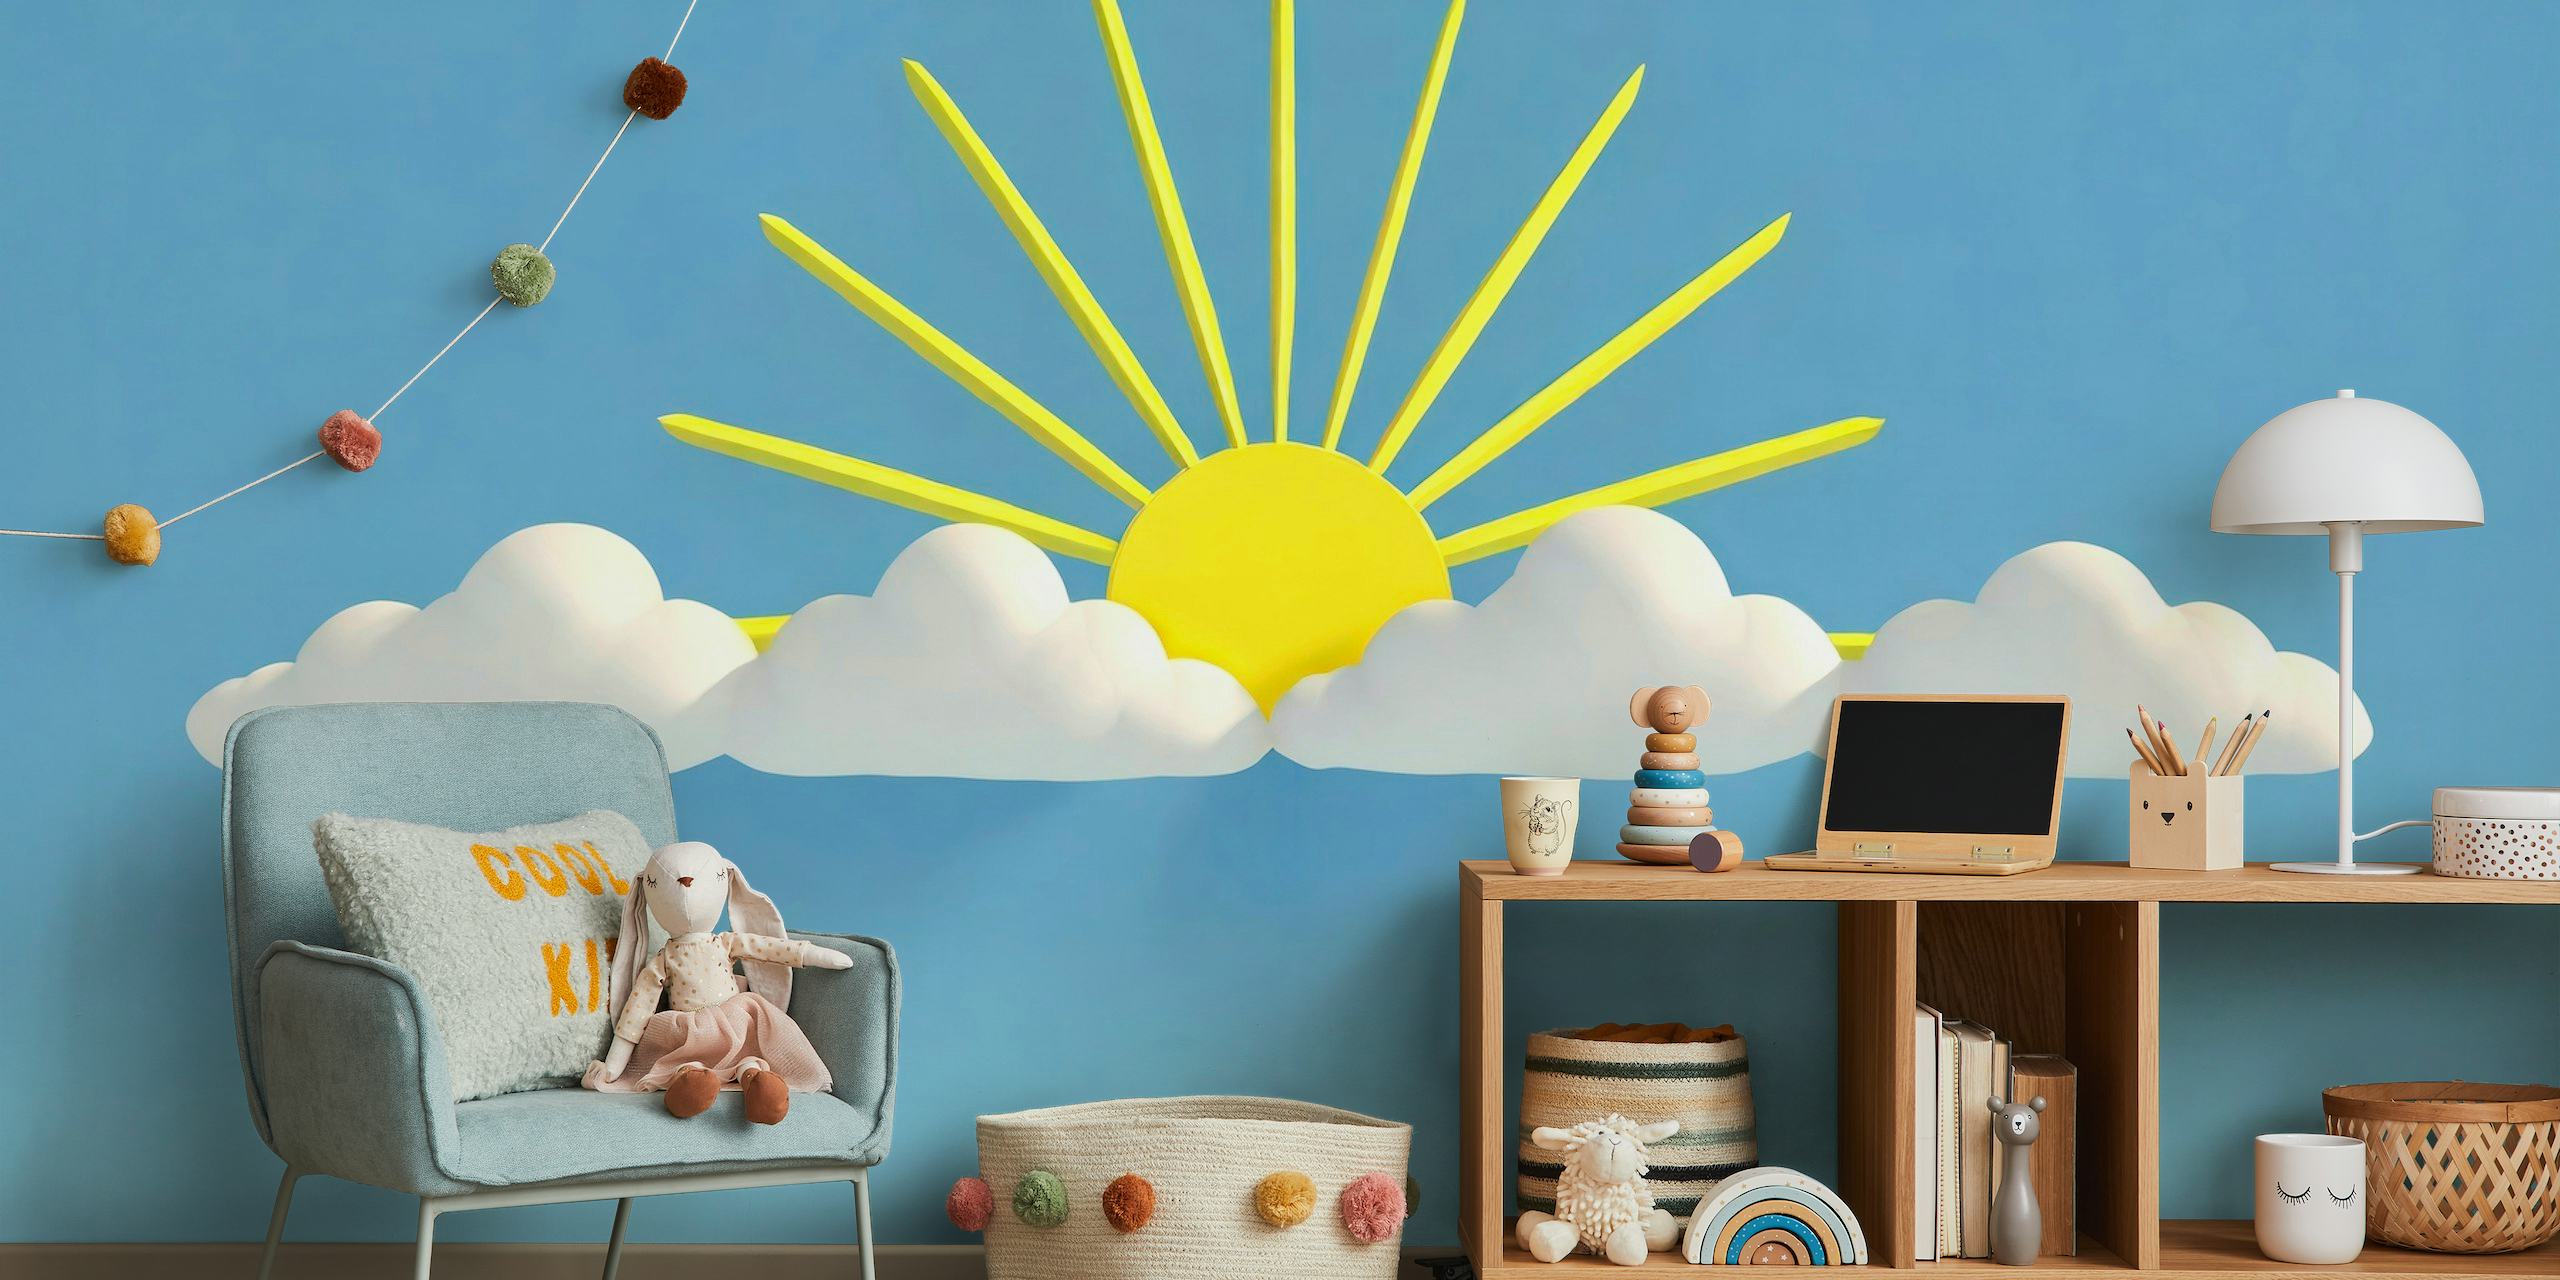 Illustration of a smiling sun with rays and white clouds on a blue background wall mural.